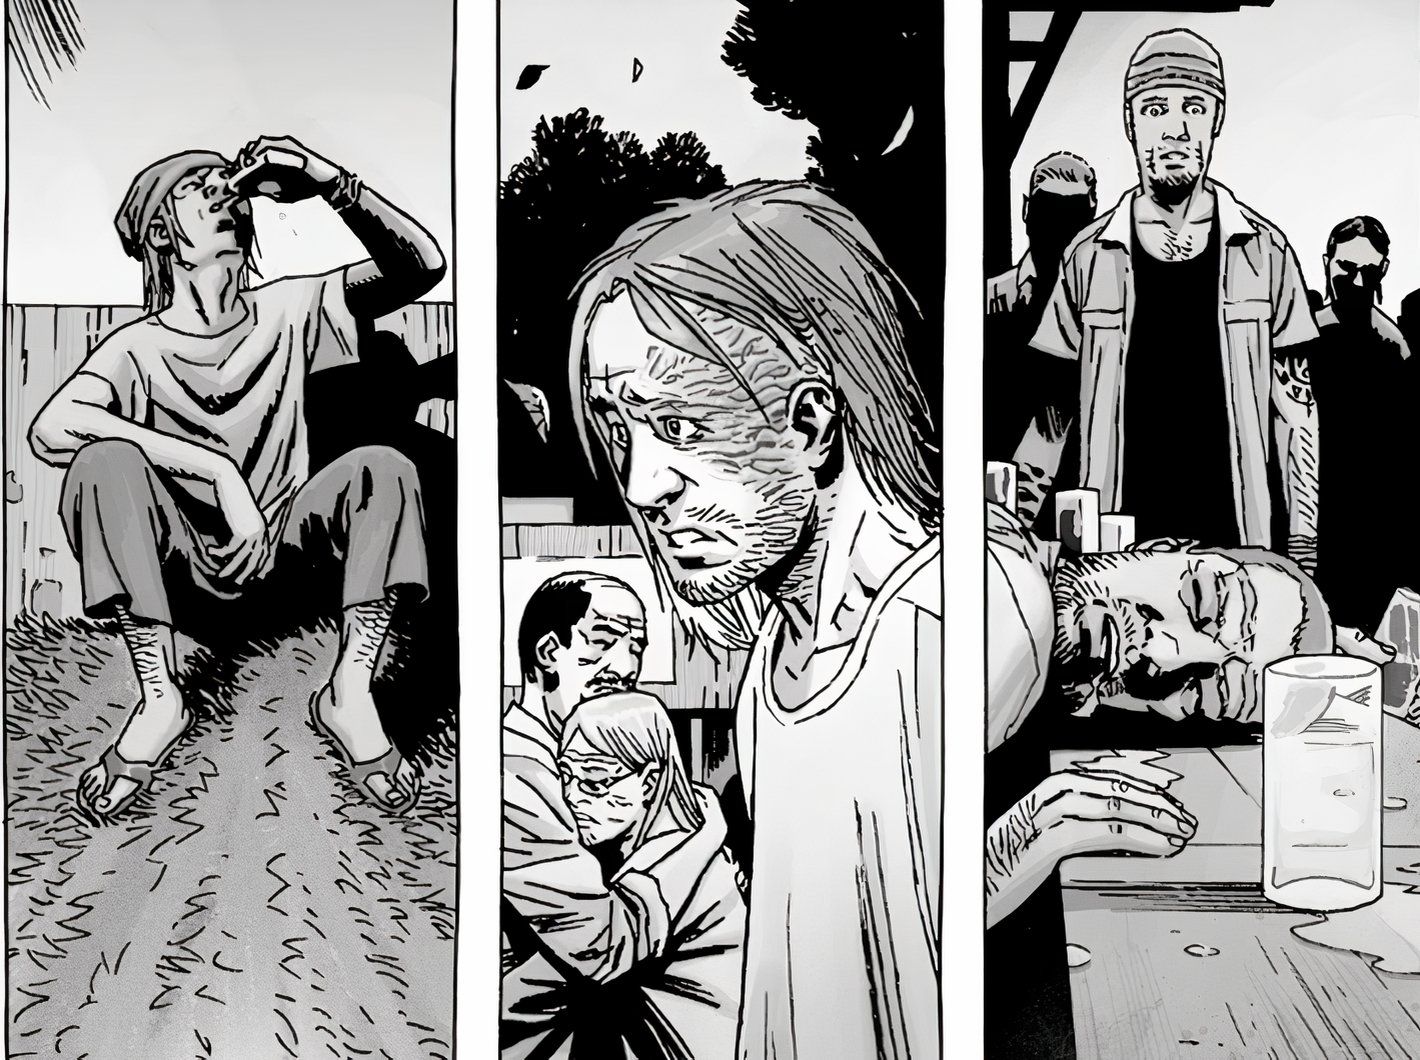 Walking Dead, characters drink to cope with the deaths of members of their community